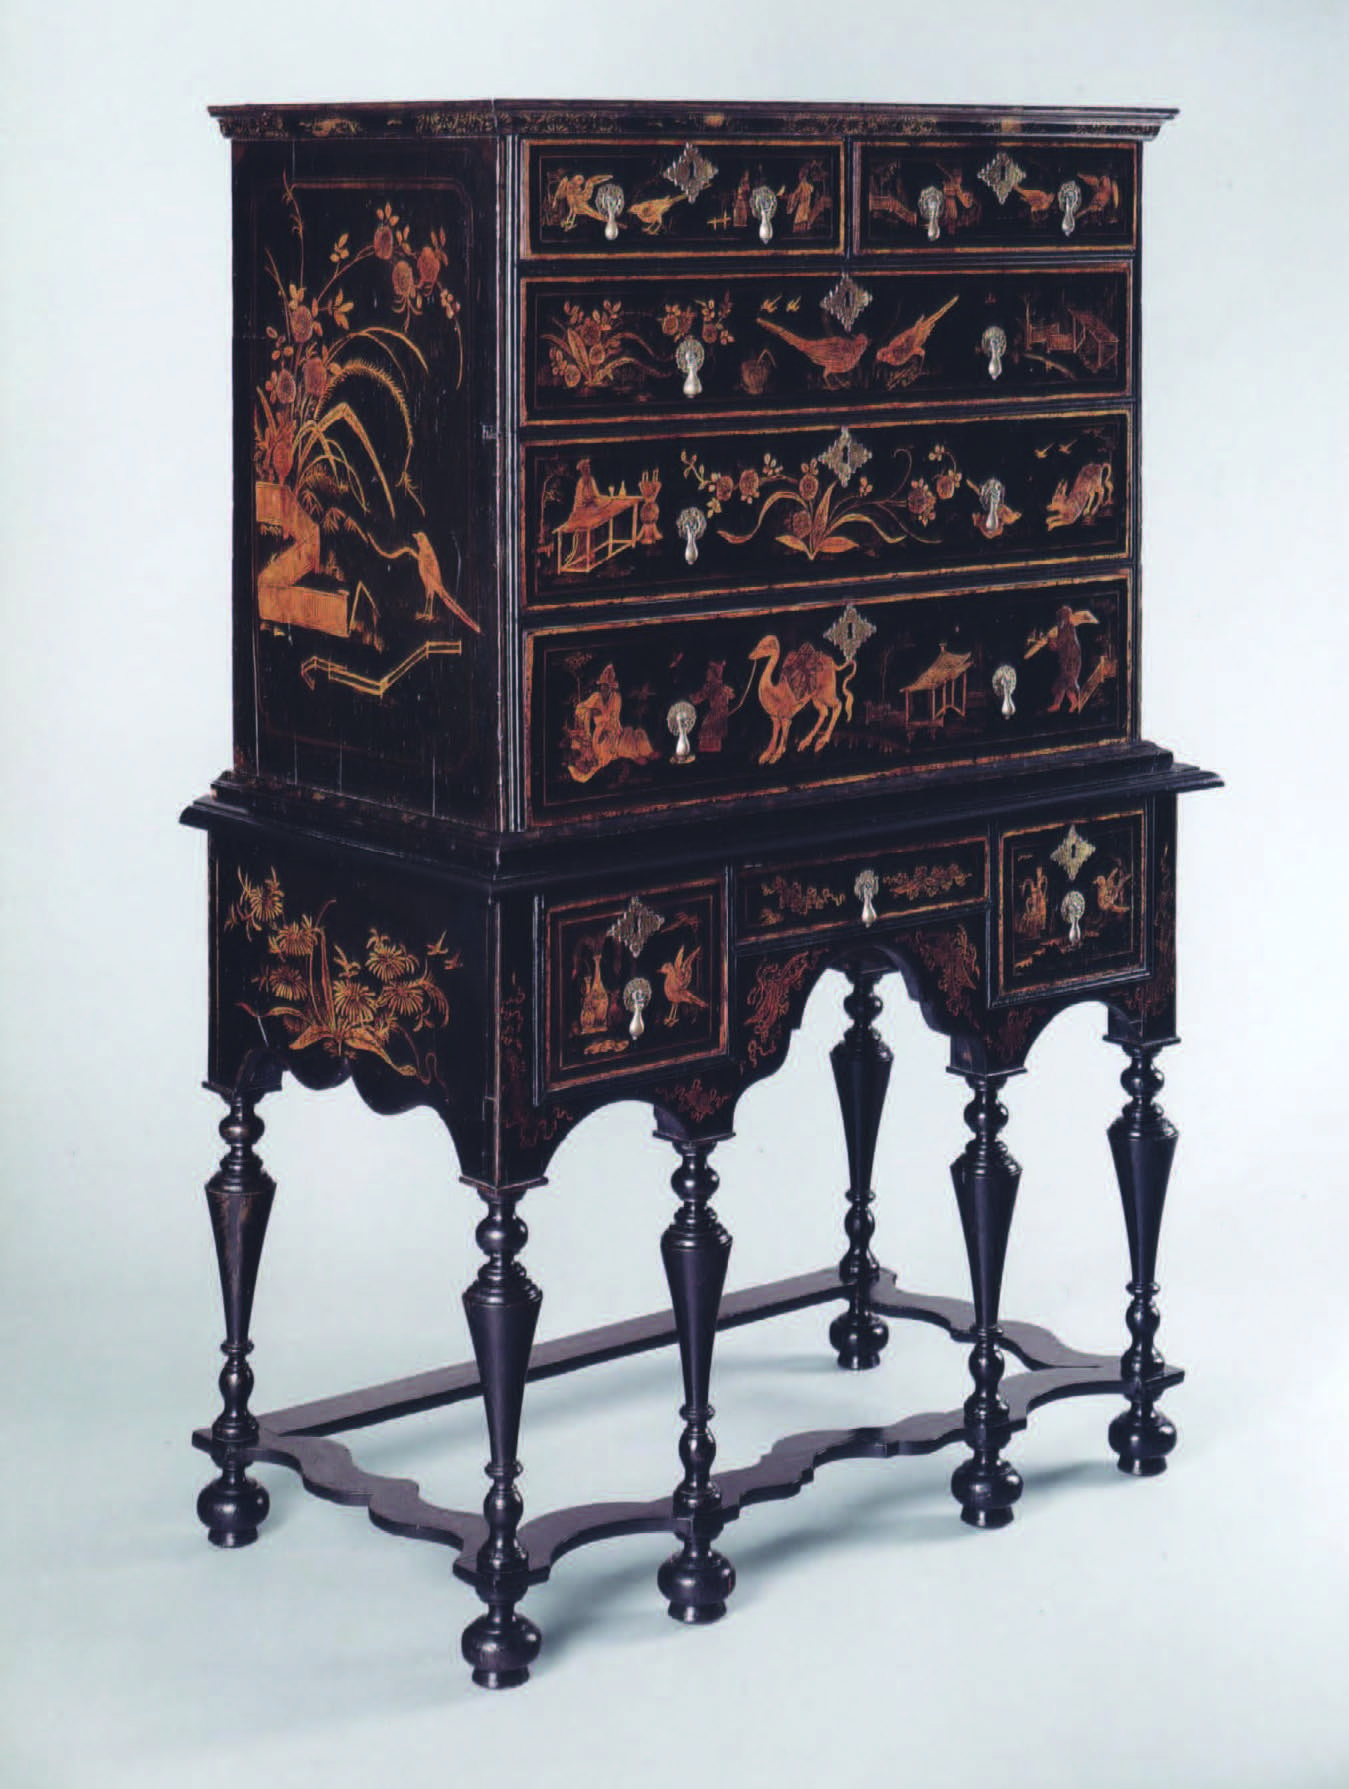 American Furniture in The Metropolitan Museum of Art : Vol. I. Early Colonial Period: The Seventeenth-Century and William and Mary Styles / Frances Gruber Safford